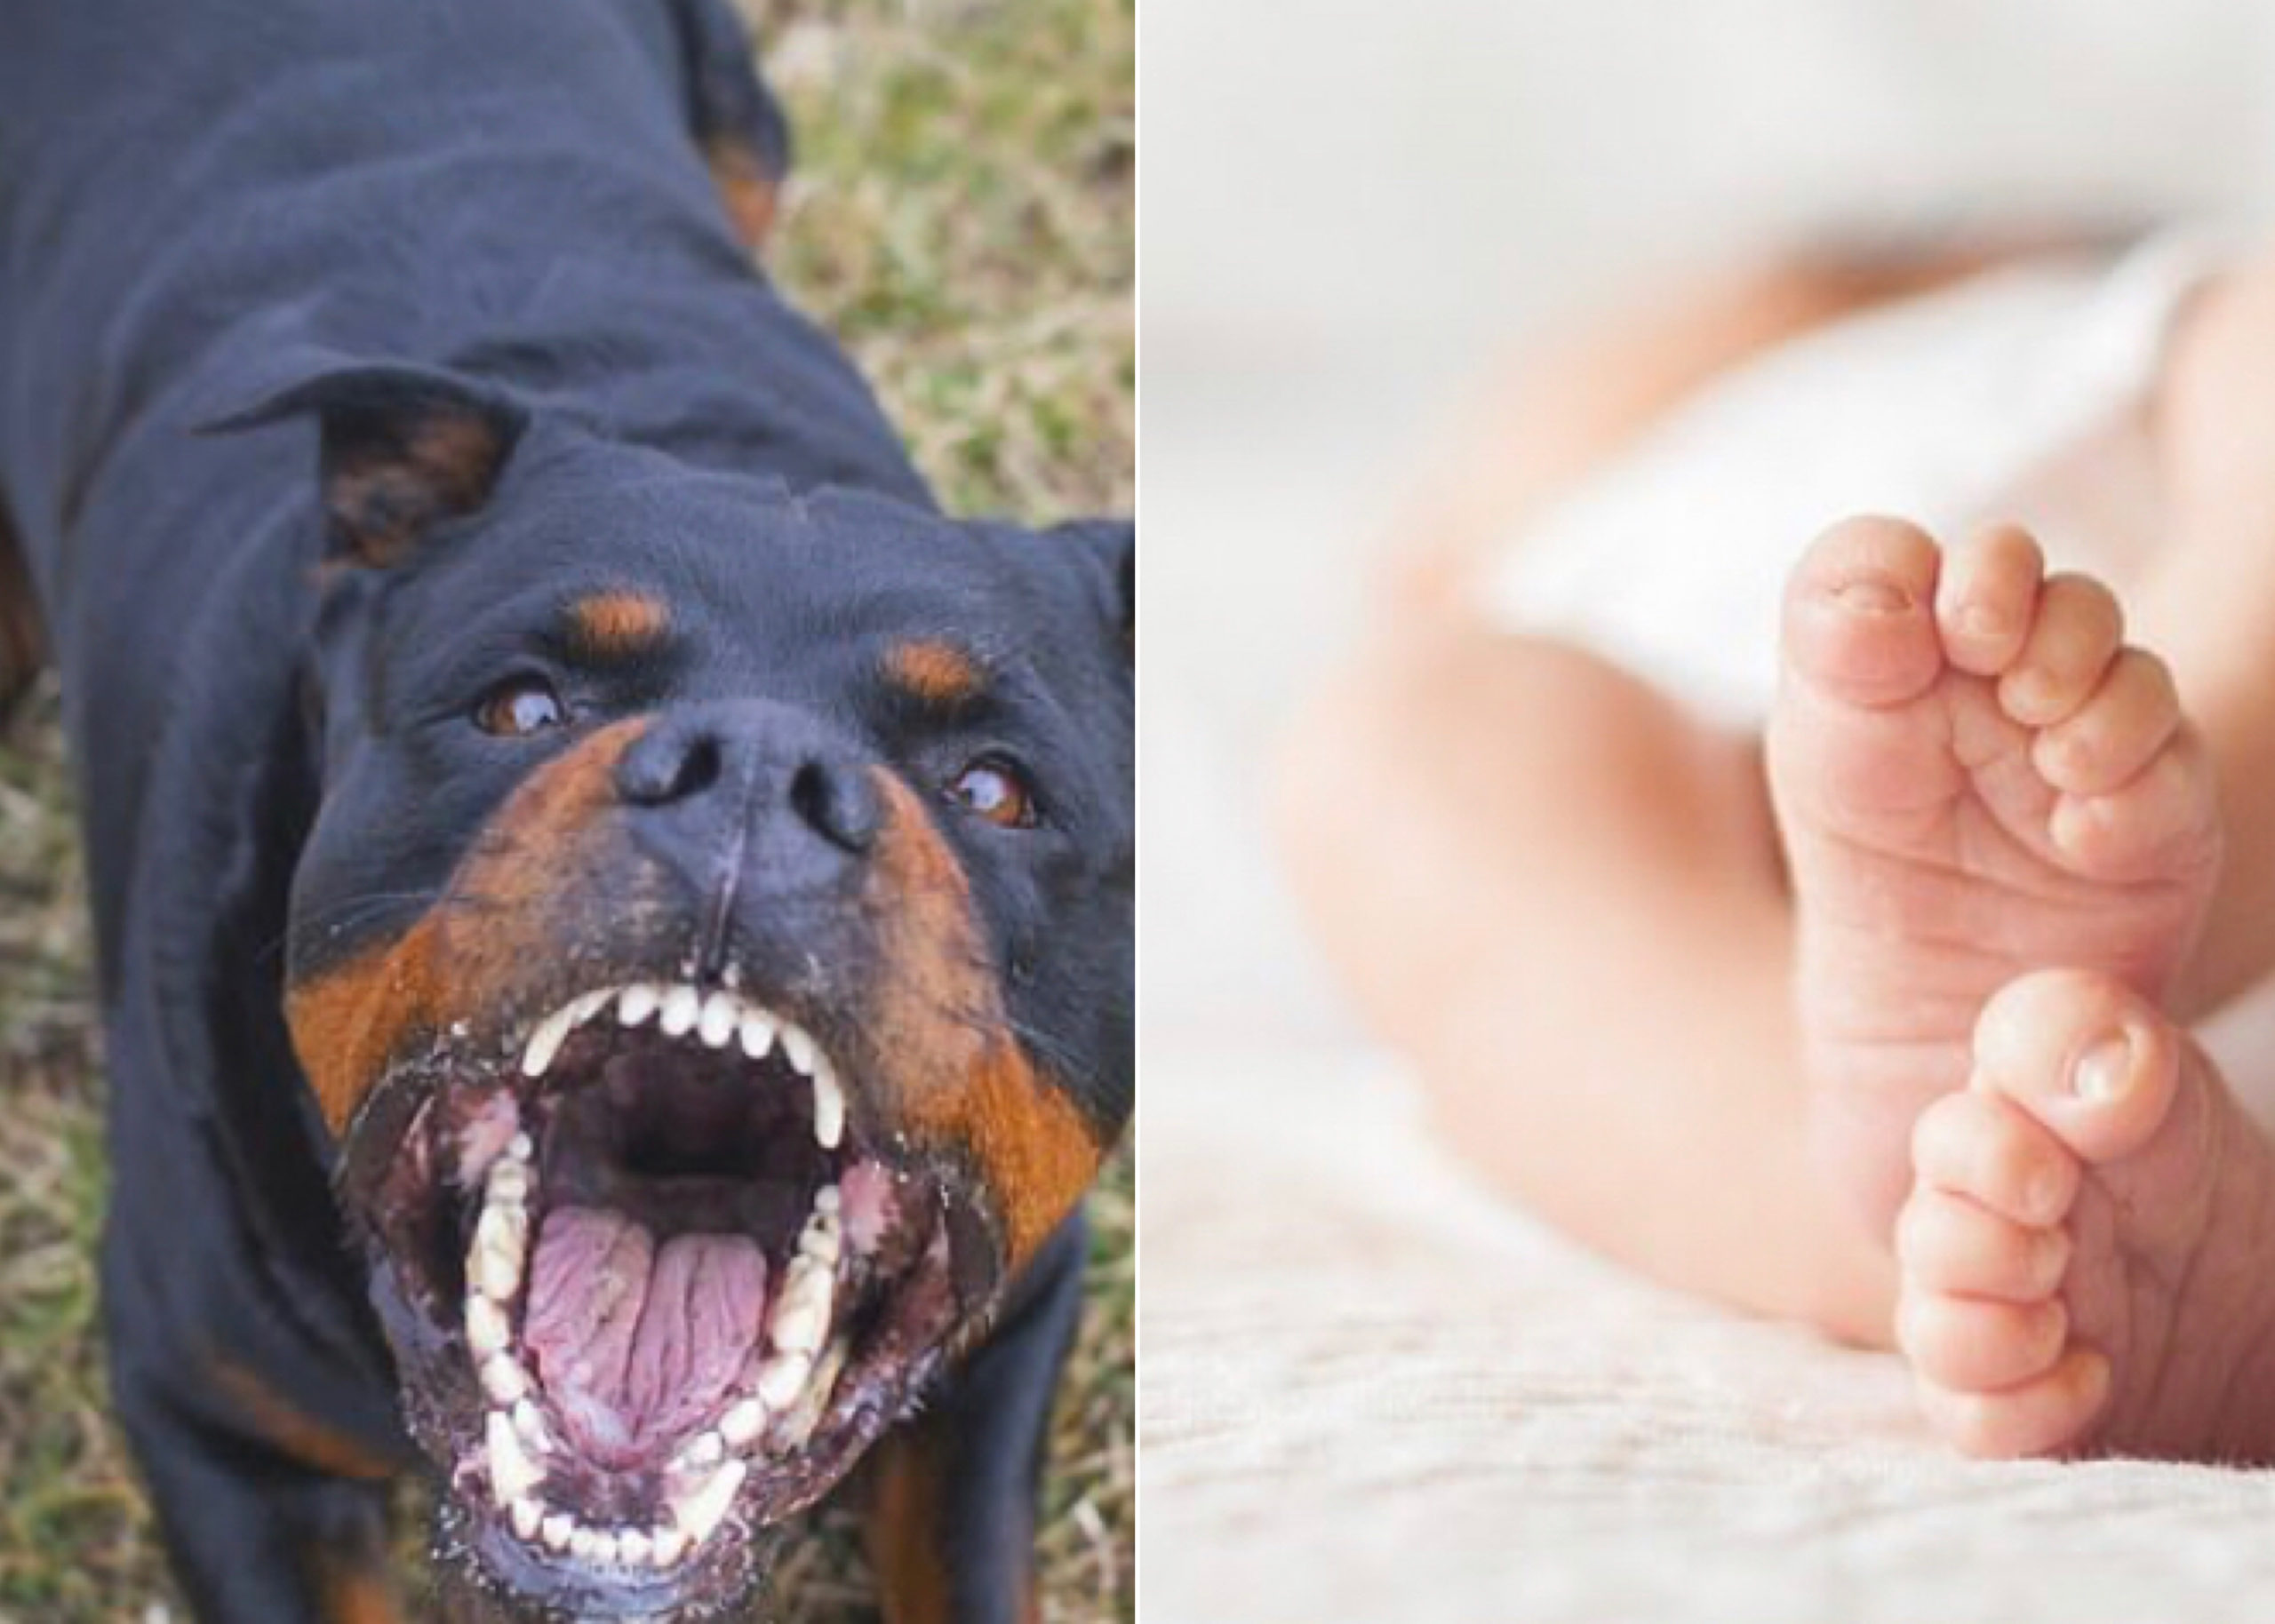 Family Rottweiler Dog Fatally Mauls 1-Day-Old Baby Boy